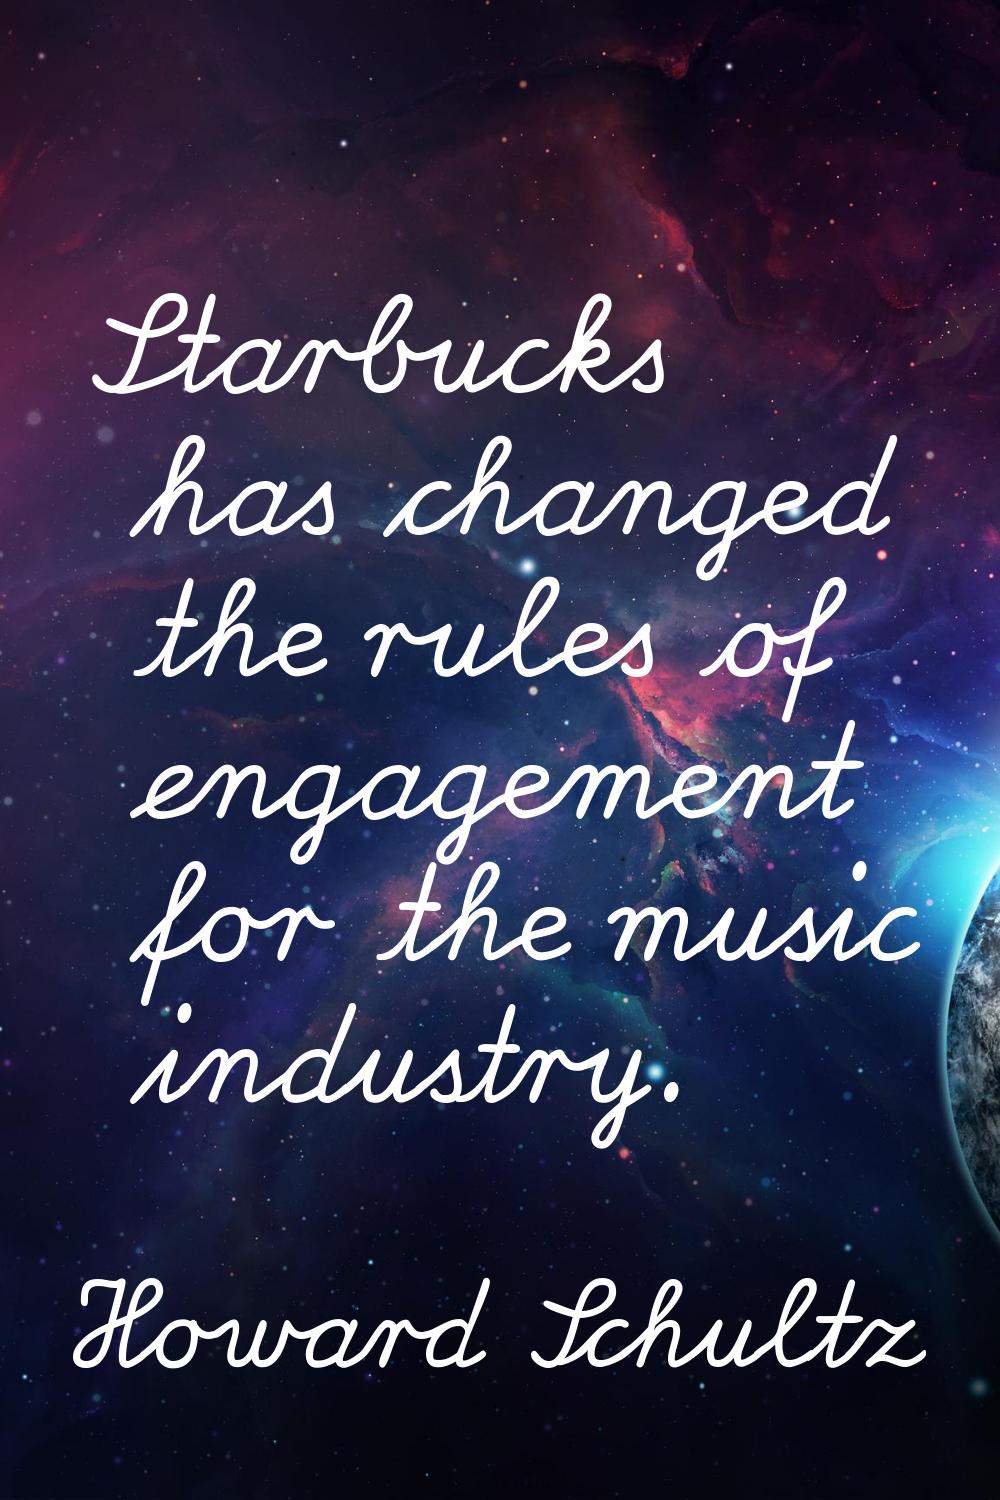 Starbucks has changed the rules of engagement for the music industry.